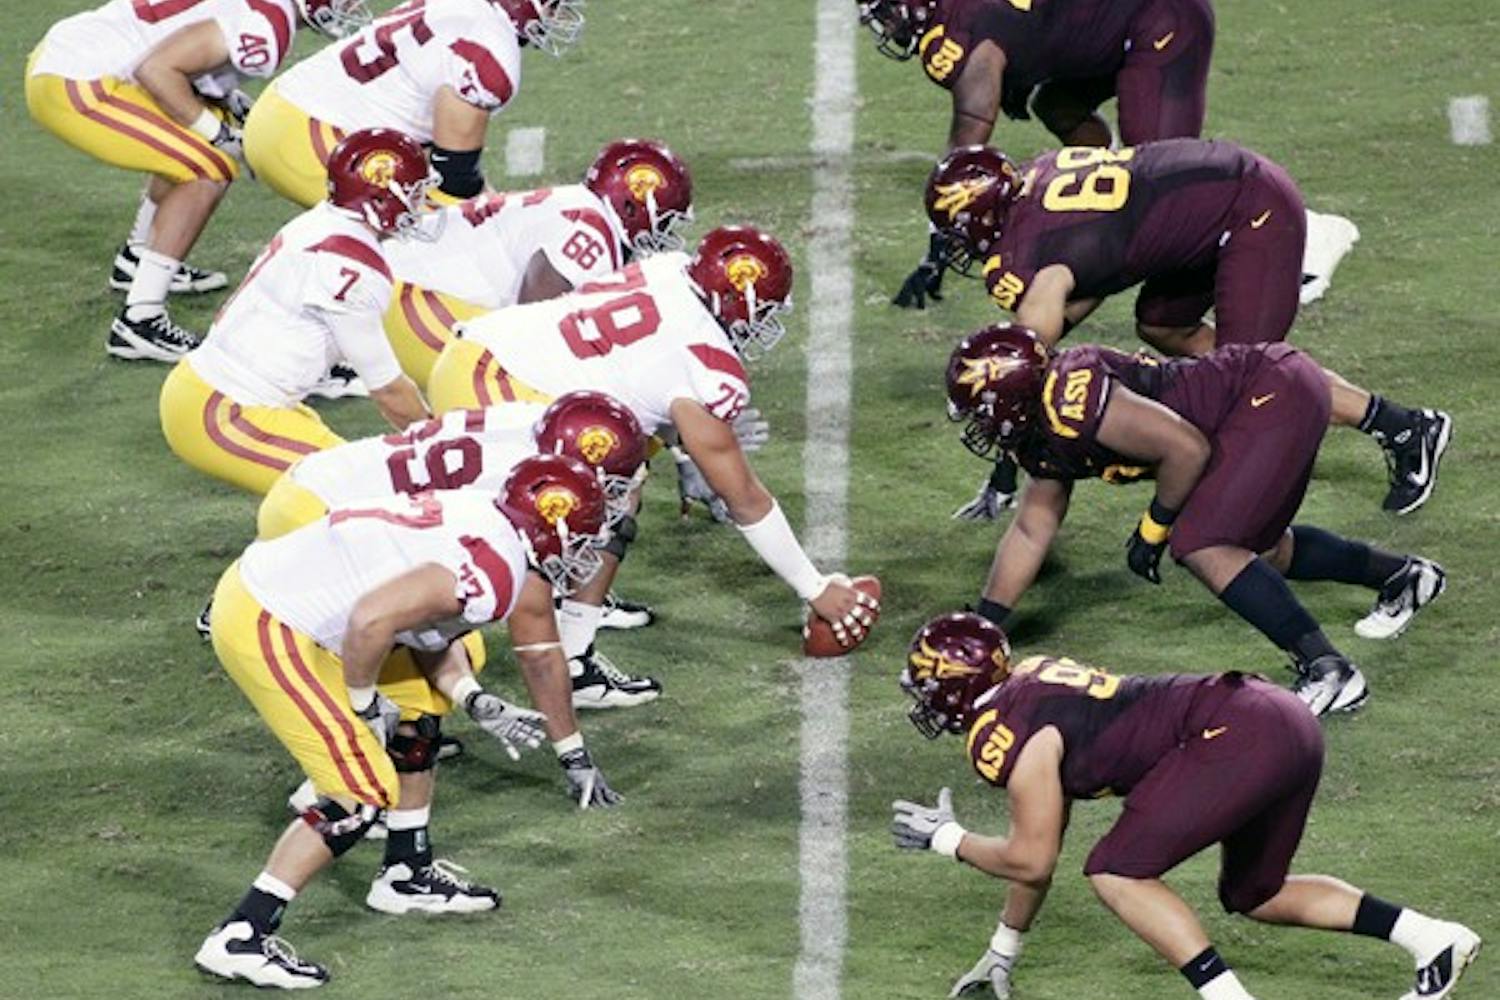 STERN TEST: ASU’s defensive line waits for USC junior quarterback Matt Barkley to snap the ball during the Sun Devils’ win on Saturday. Oregon State freshman quarterback Sean Mannion has to be able to handle the pressure from ASU’s D-Line if the Beavers want the upset. (Photo by Beth Easterbrook)